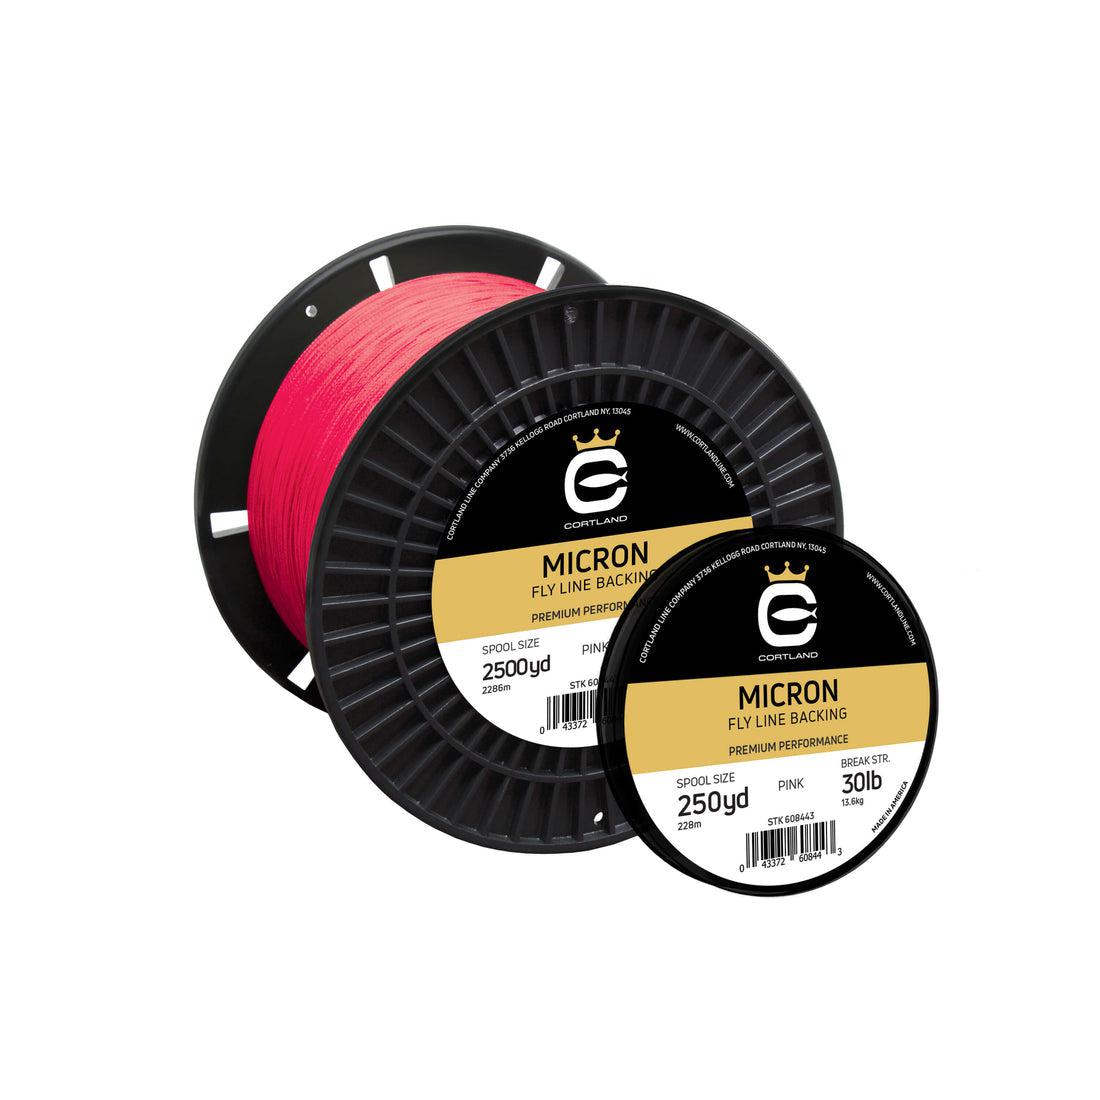 Cortland Micron Fly Line Backing 30 lb 250 yds Pink Fly Line Backing